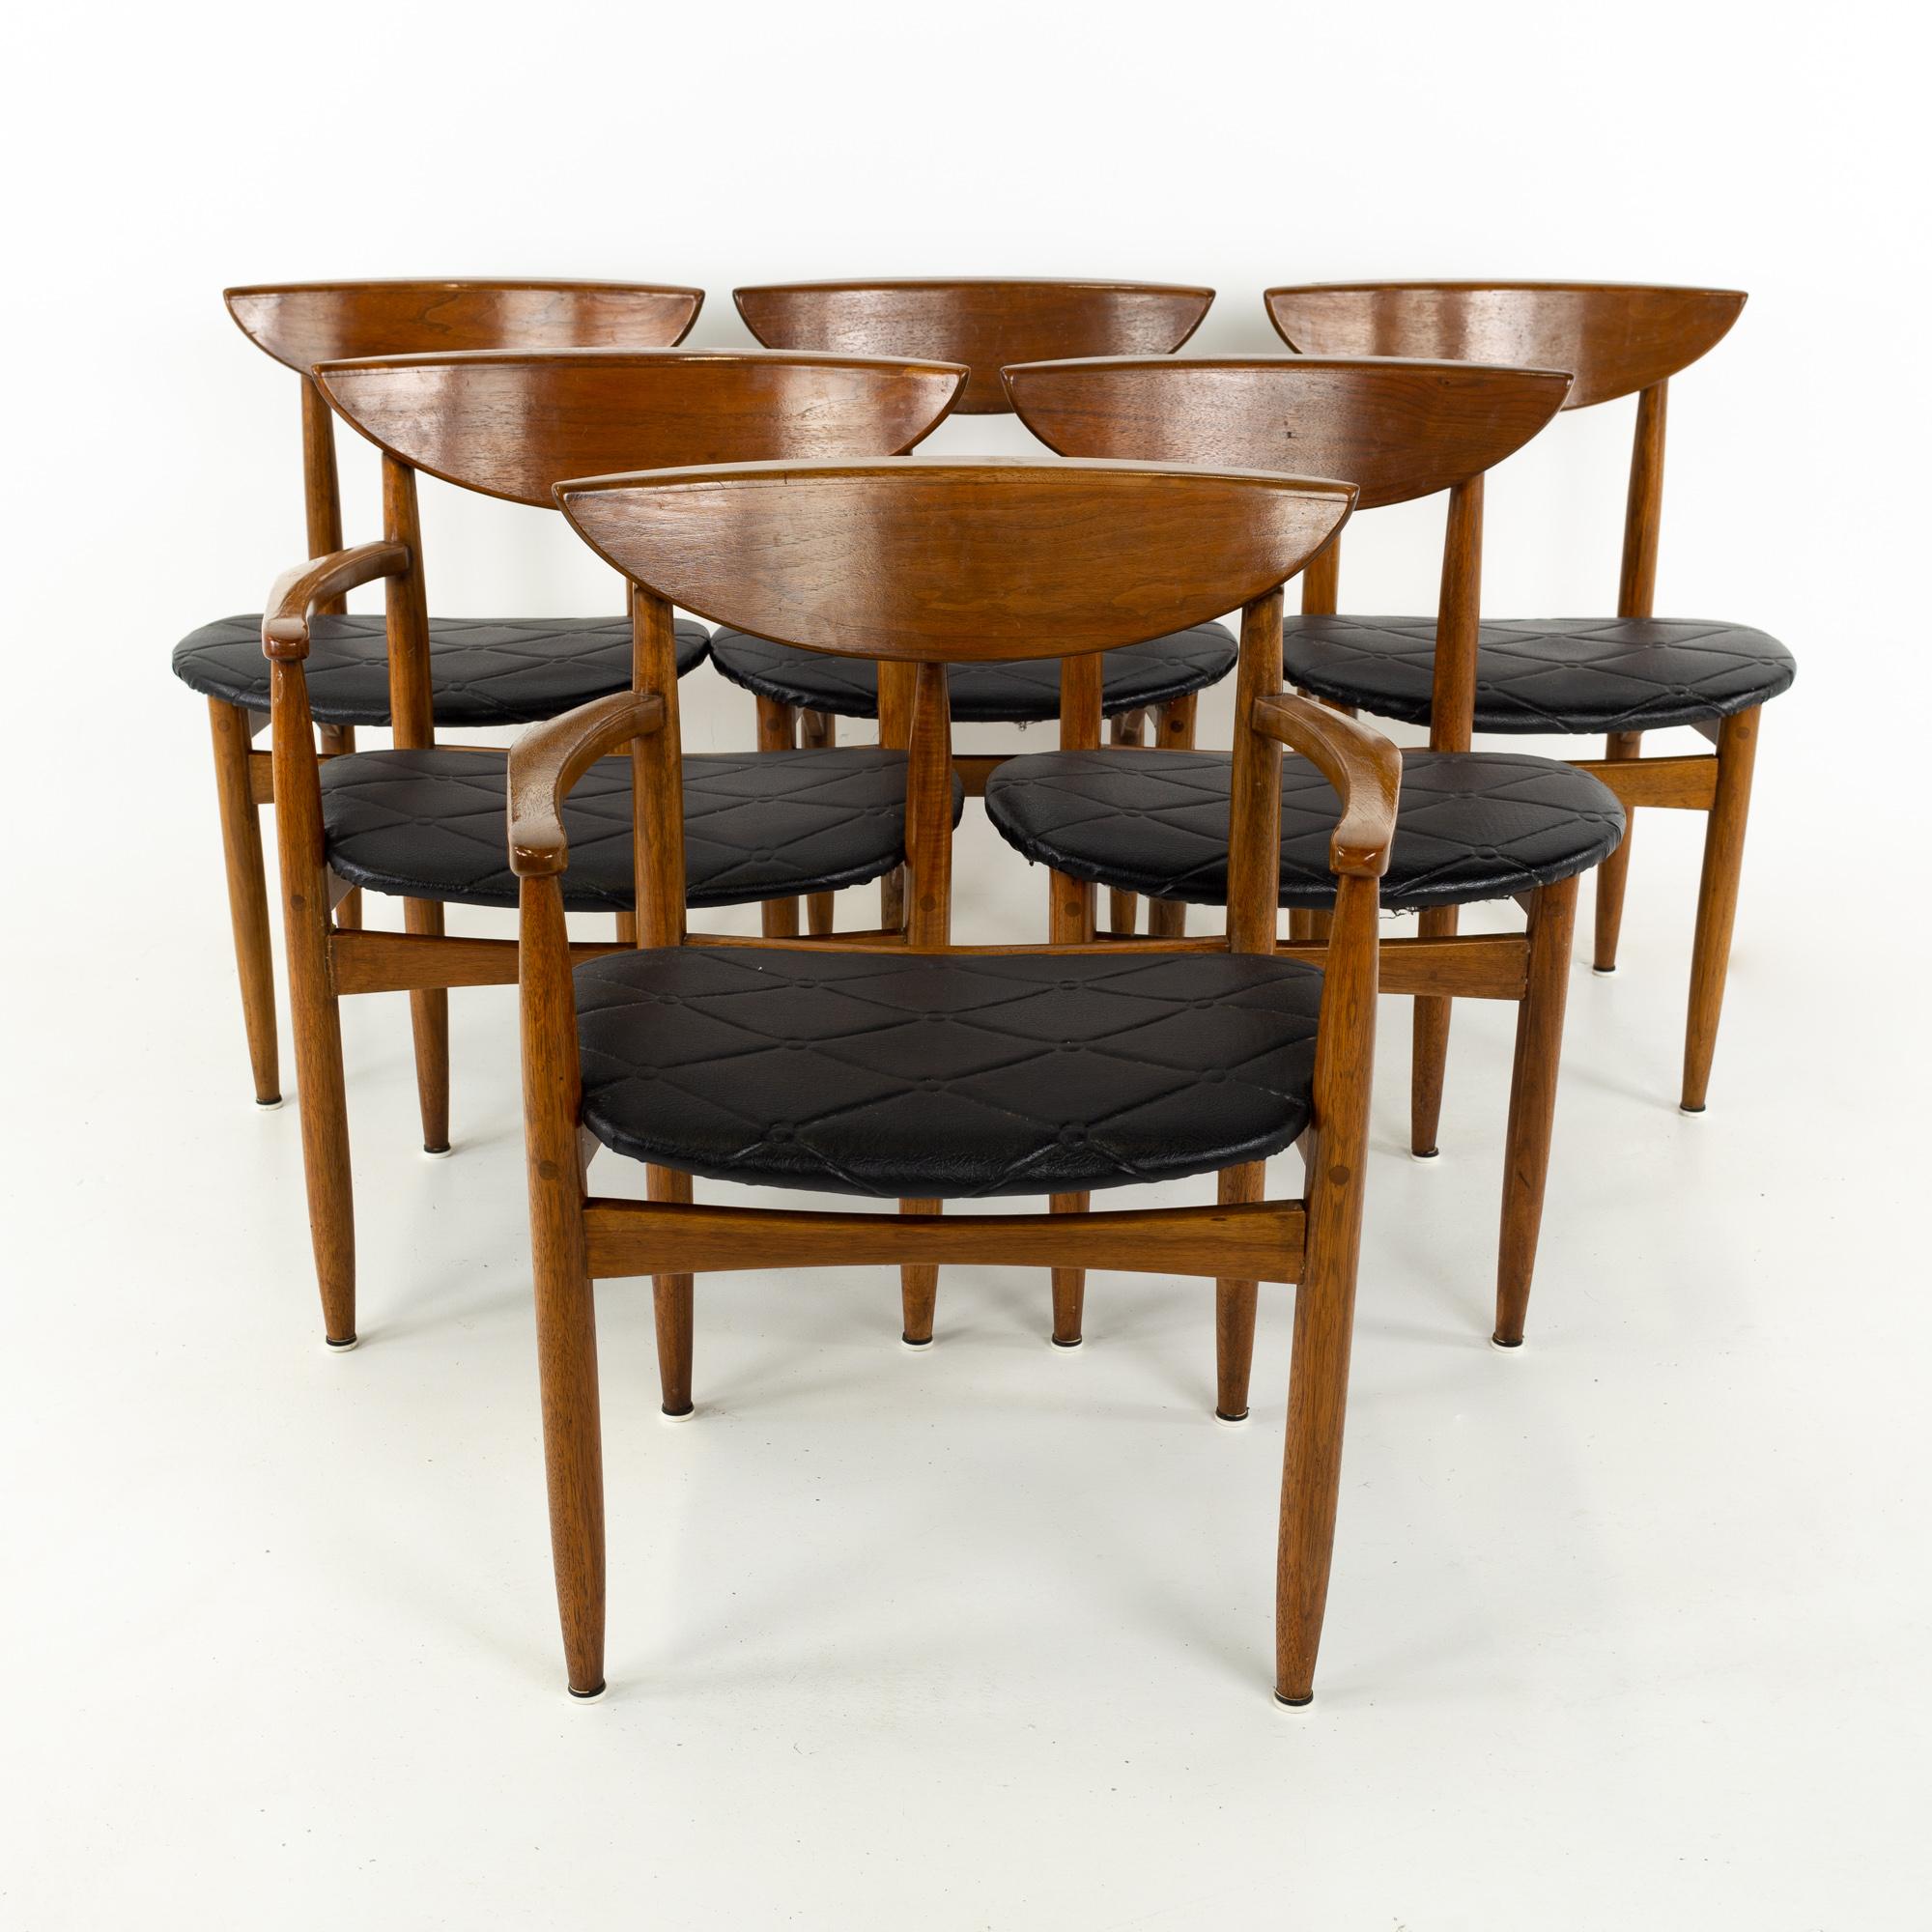 Lane Perception mid century dining chairs - Set of 6

Each chair measures: 25 wide x 18 deep x 30.5 high, with a seat height of 17 inches and arm height/chair clearance of 24.75 inches

?All pieces of furniture can be had in what we call